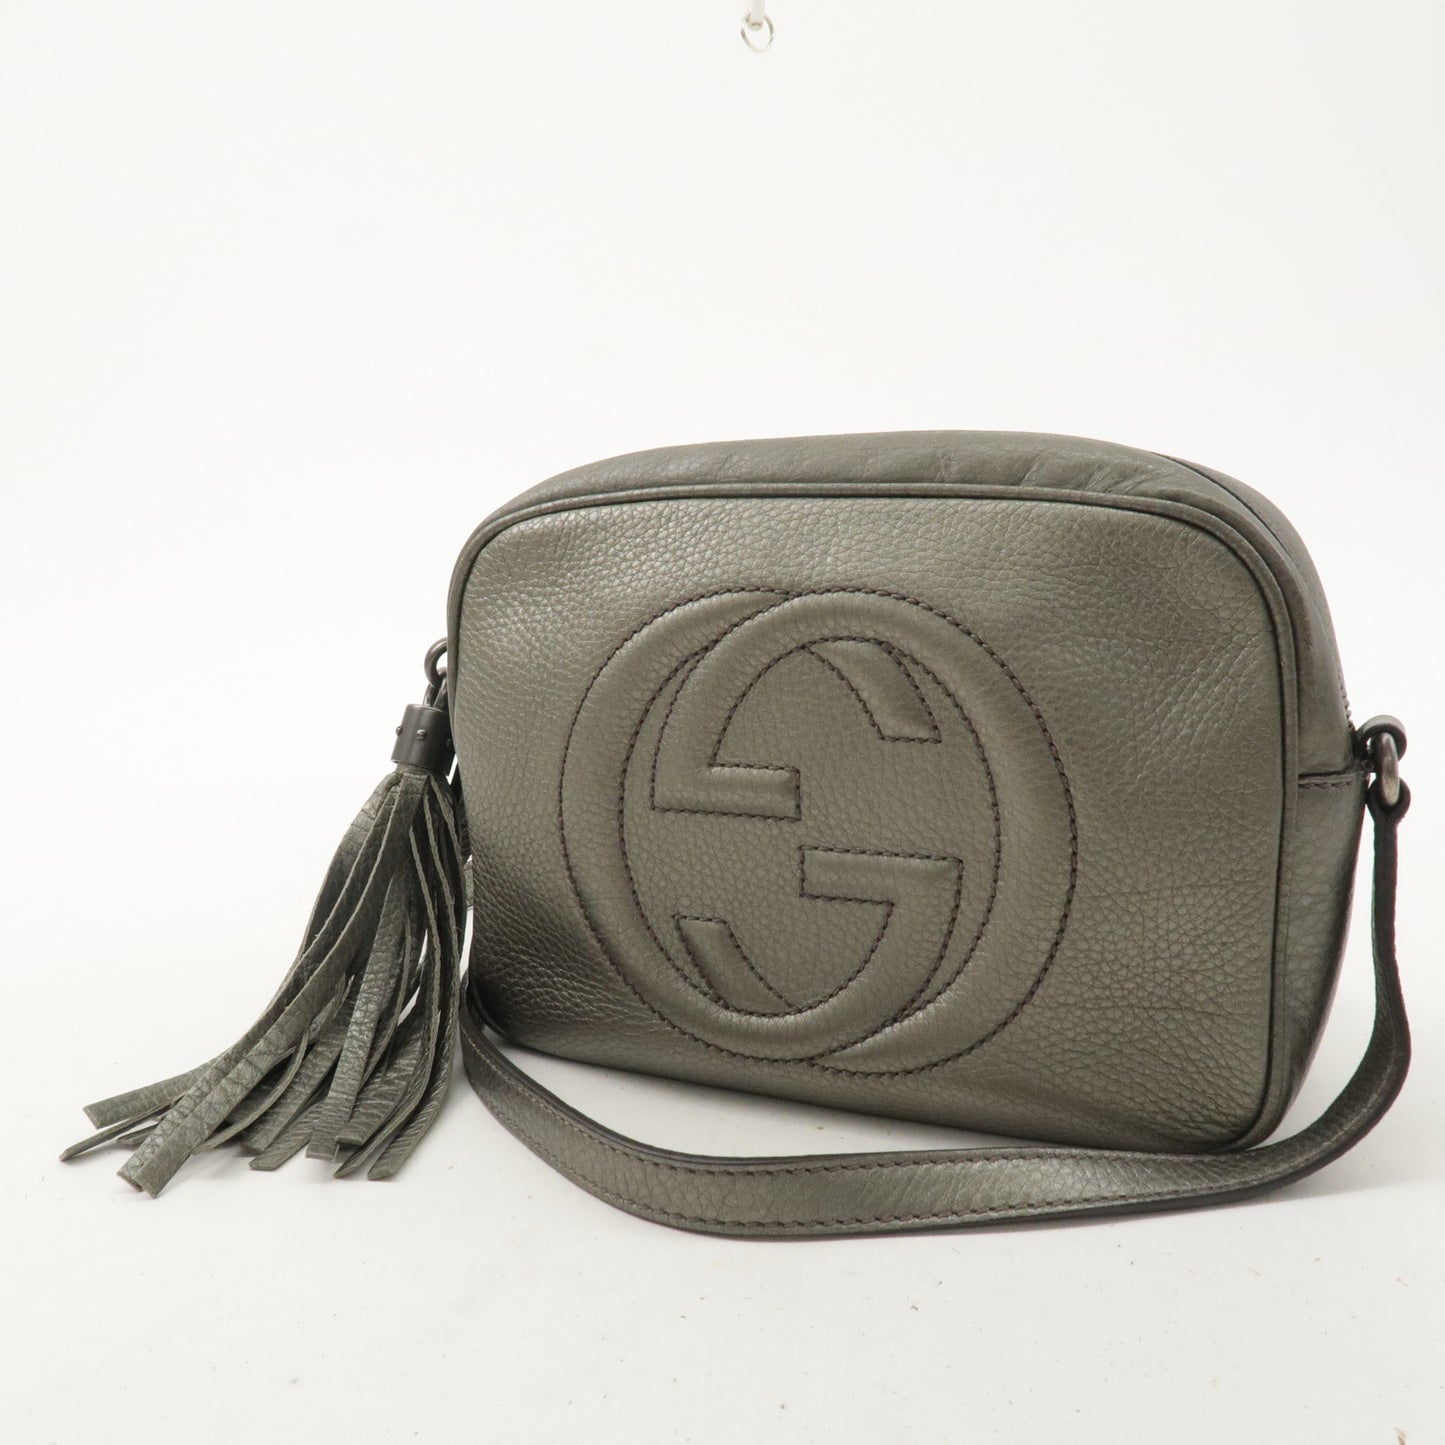 GUCCI SOHO Leather Small Disco Shoulder Bag Silver 308364